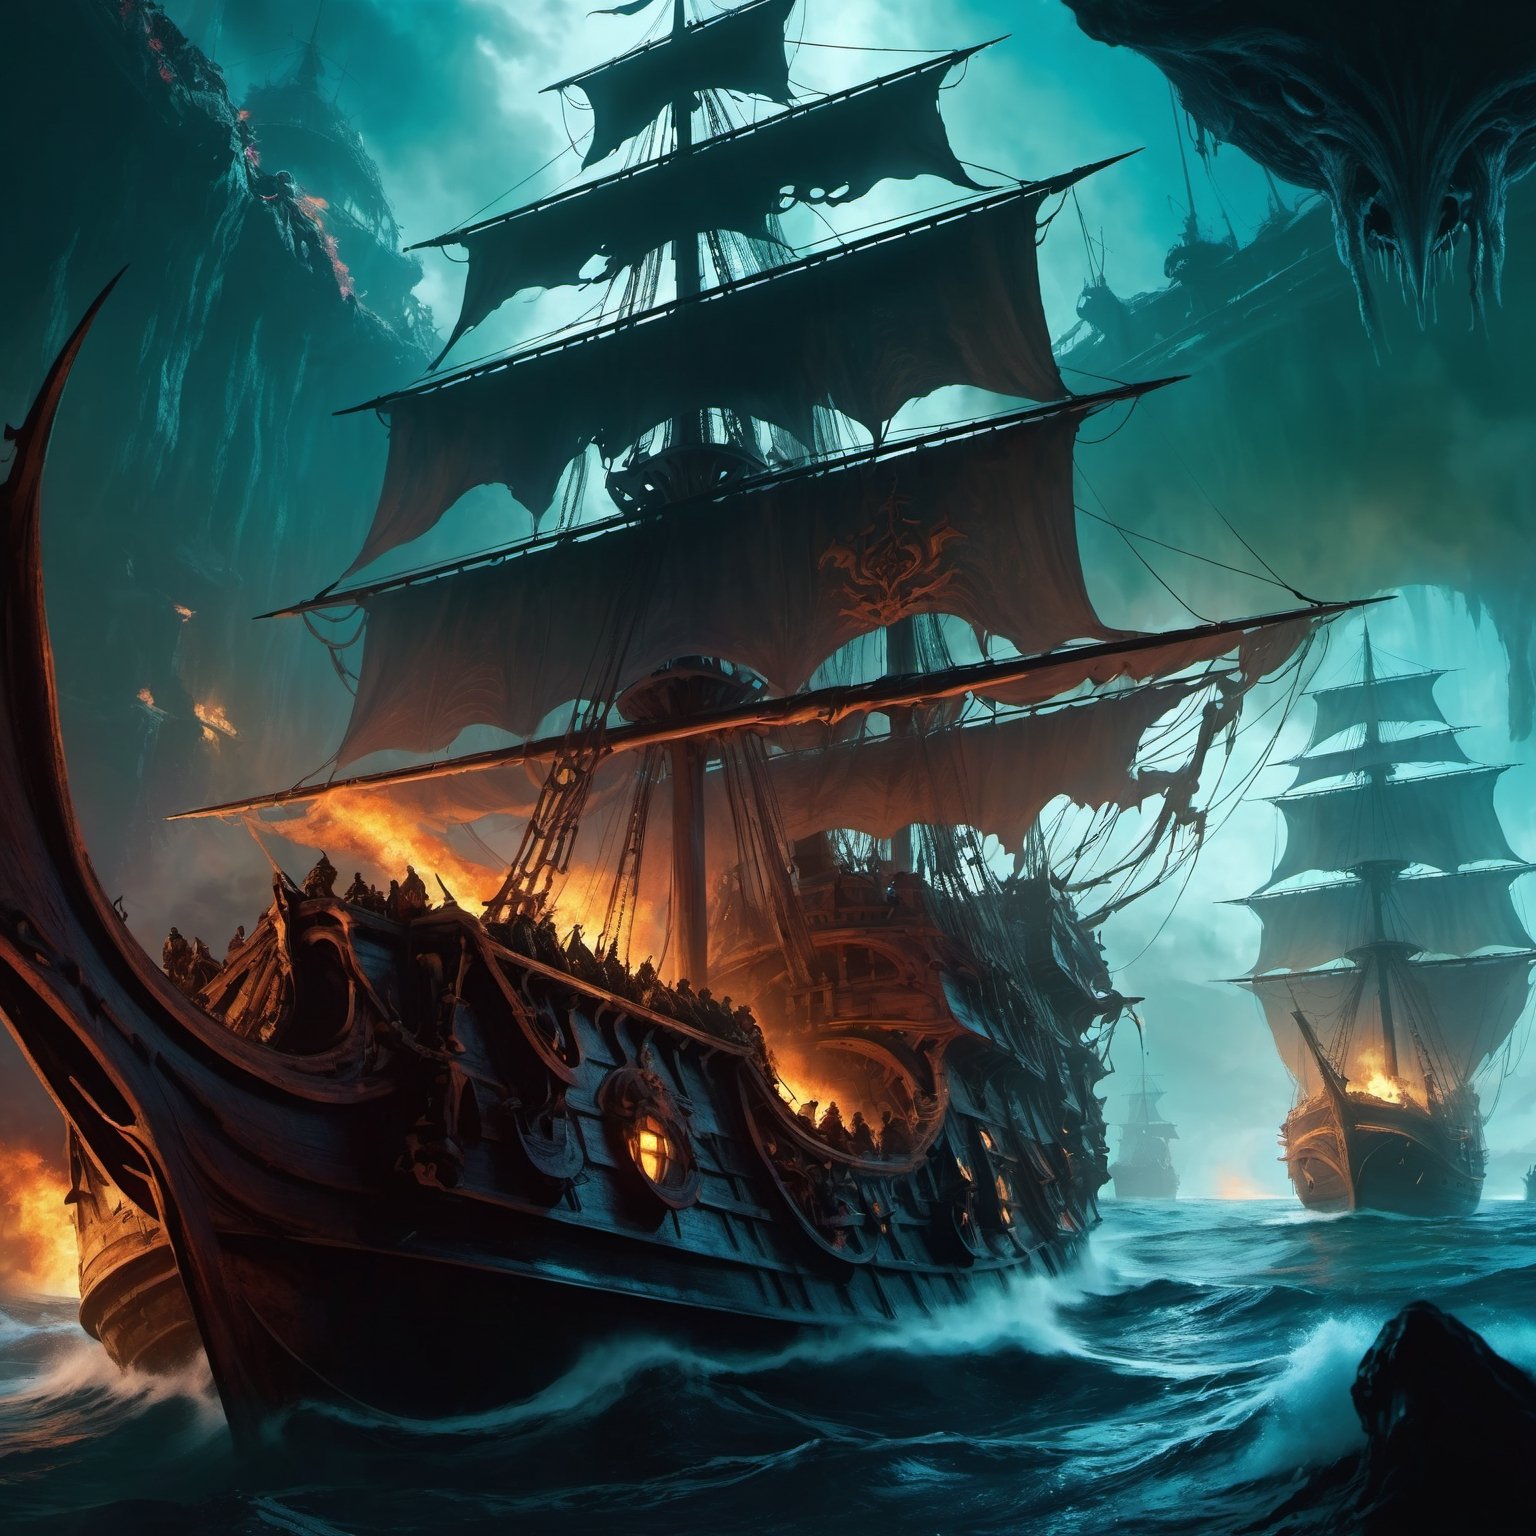 (8k HDR), (masterpiece, best quality),

Davy Jones, Captain of the Daemon Ship:

"Davy Jones commands the Flying Dutchman, a cursed starship sailing the immaterial seas of the Warp. As a Daemon Prince of Nurgle, Jones and his crew of Plague Marines and decayed souls spread disease and despair. His ship, a grotesque fusion of organic growth and rusting metal, emerges from the Warp to unleash terror on the material worlds."

dark and vibrant, mystical, (micheal bay cinematic shots), depth of field, 2D